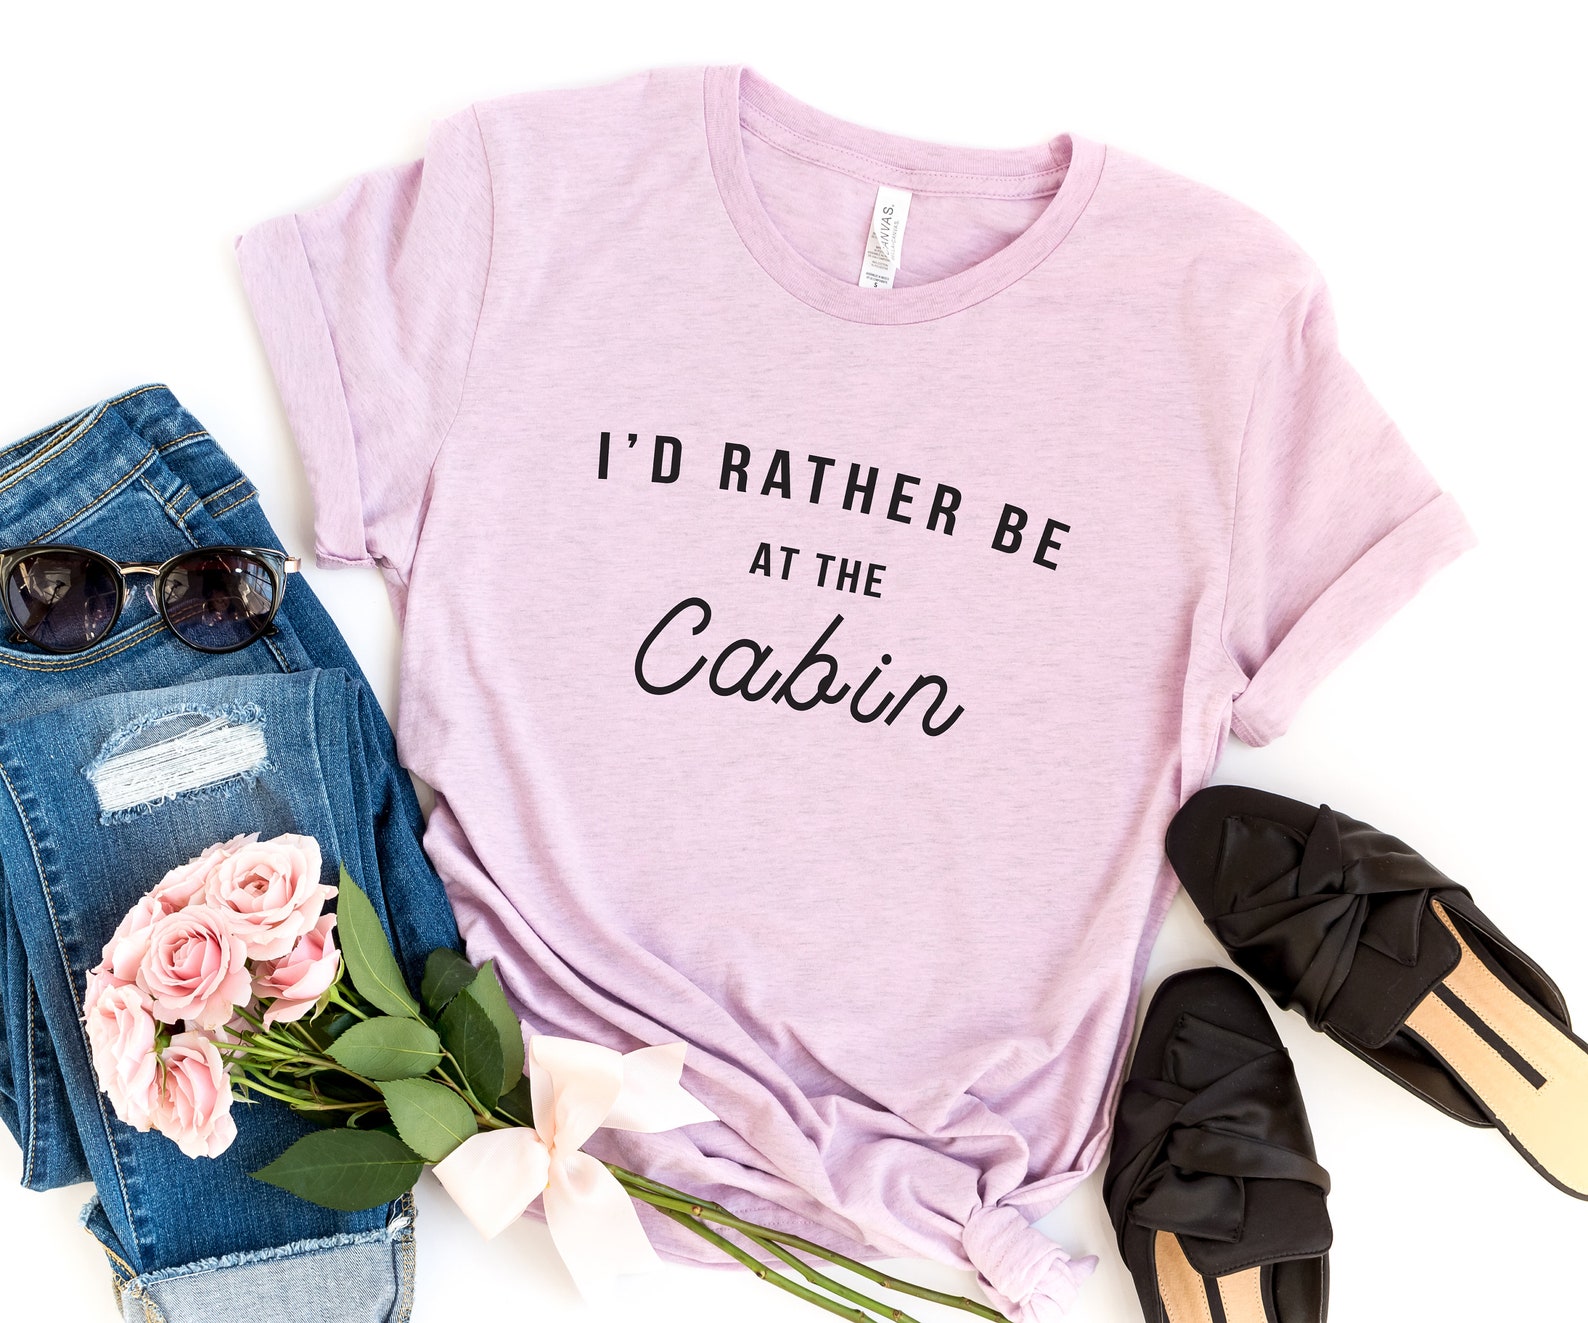 Id rather be at the cabin funny t-shirts for women shirt fall | Etsy